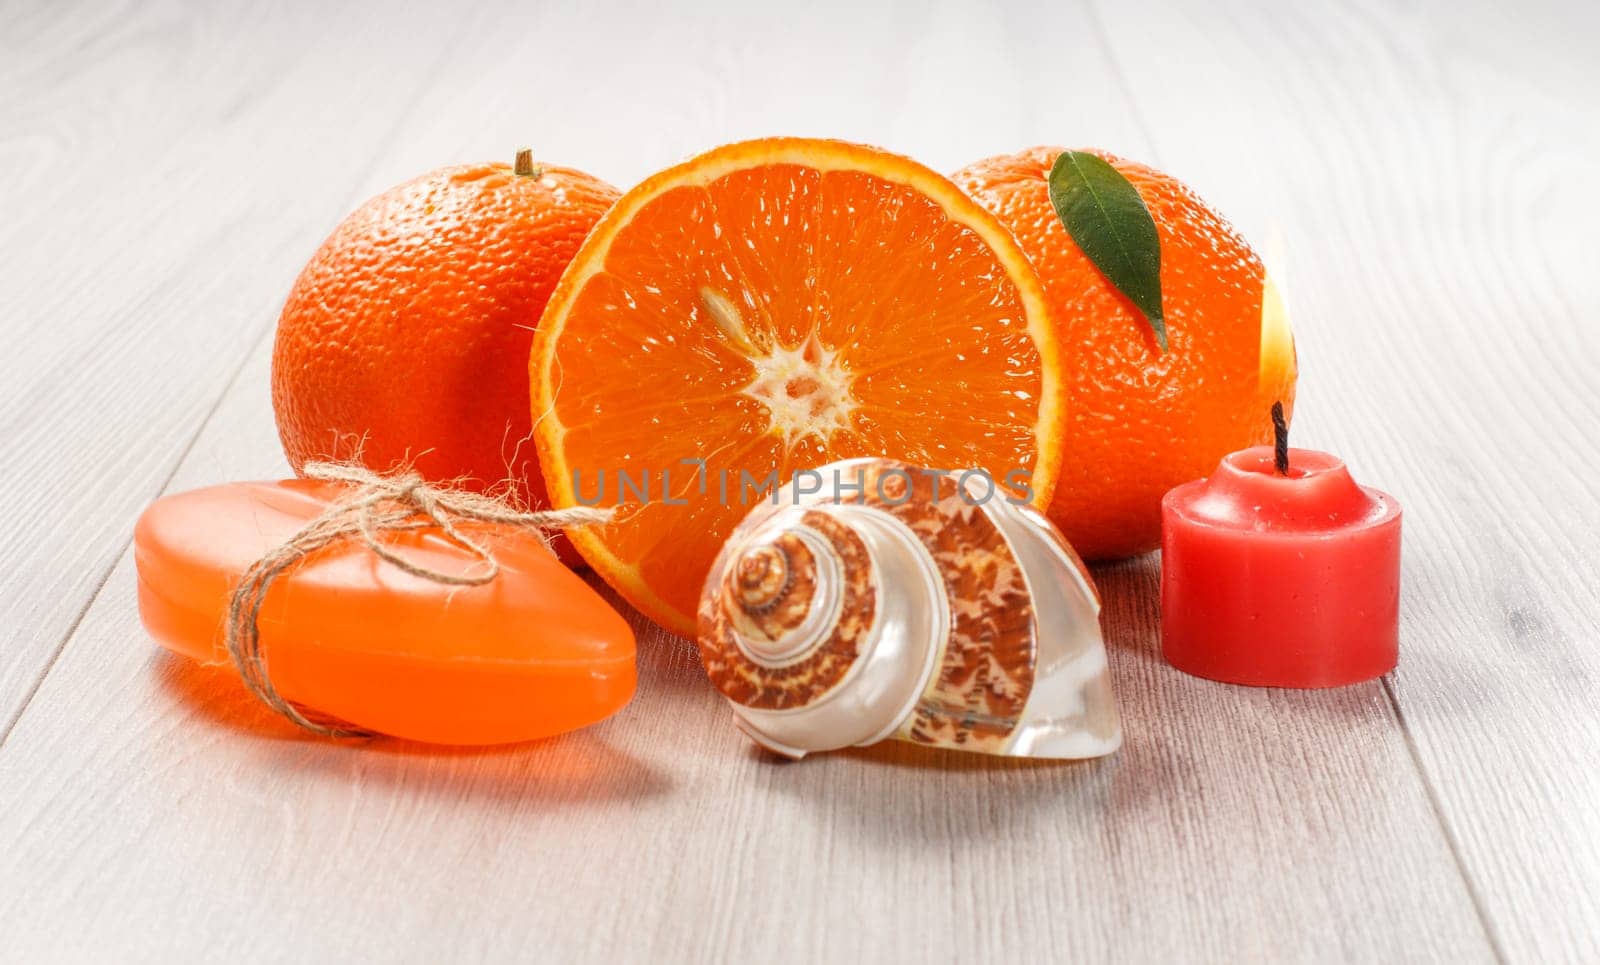 Cut orange with two whole oranges, soap, sea shell and burning candle. by mvg6894